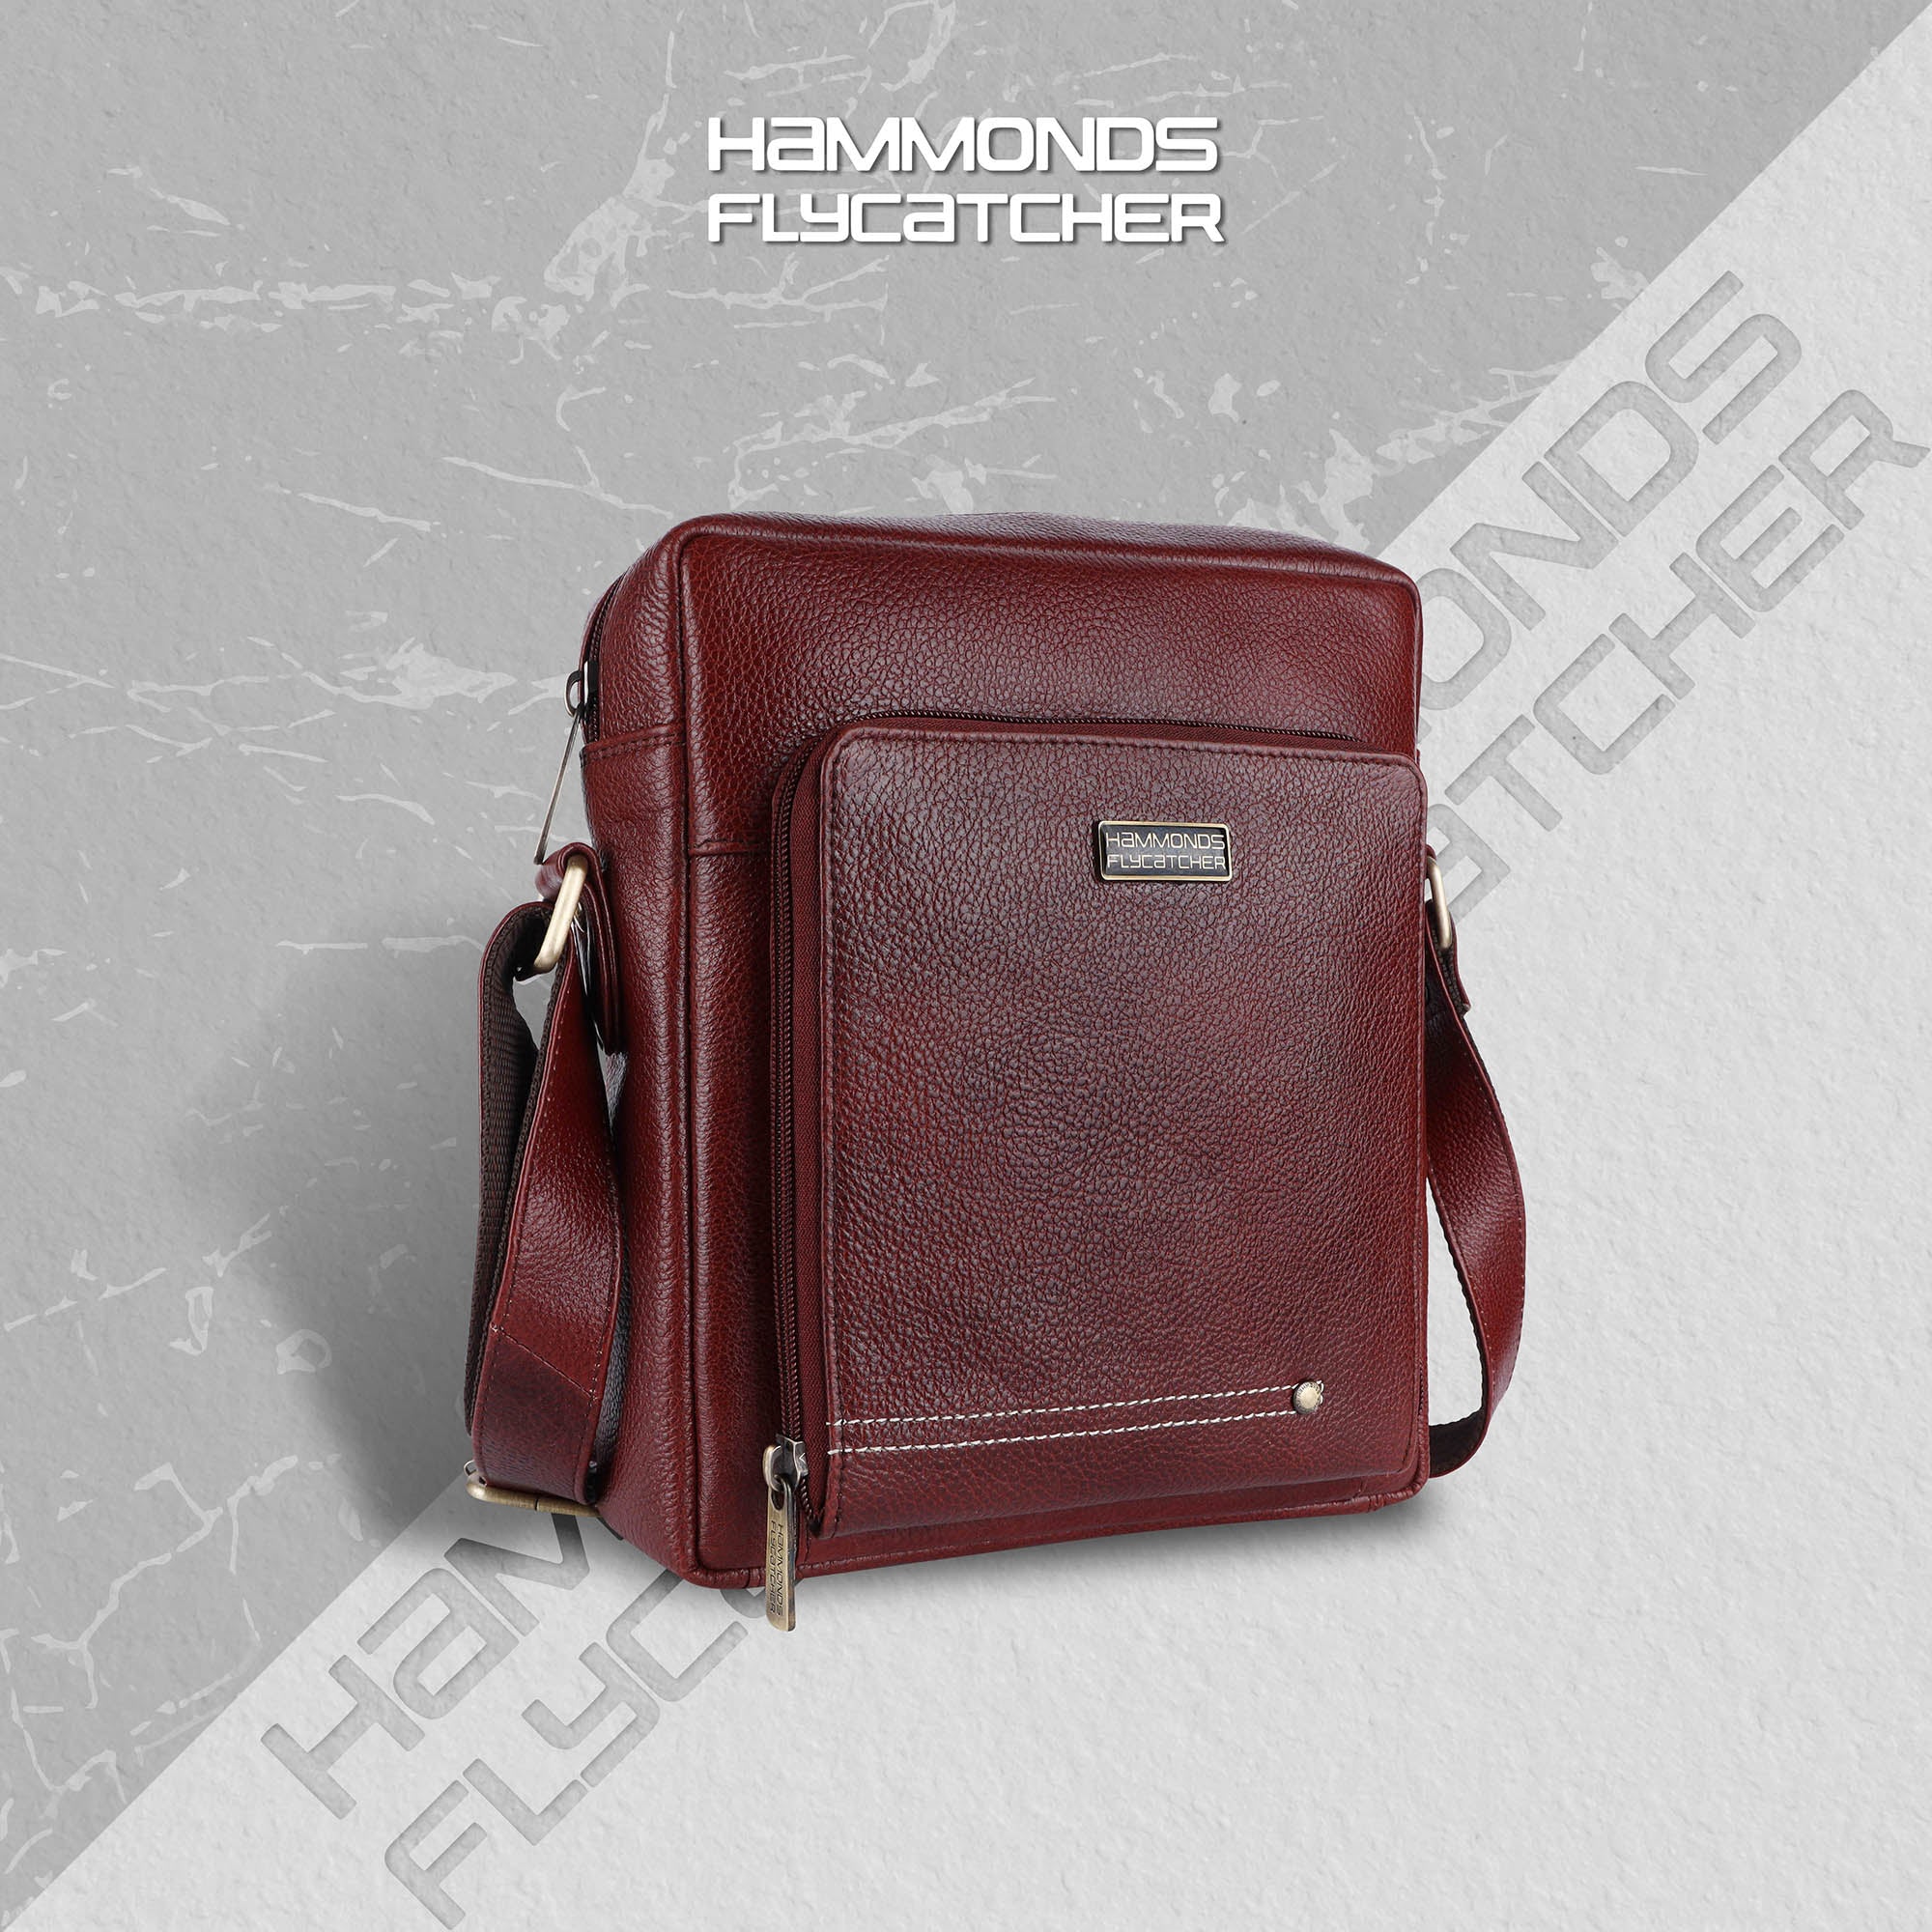 Hammonds Flycatcher Genuine Leather Travel Messenger Sling Side Documents Bags| 1 Compartments |1 Inner Zipper pocket |1 front